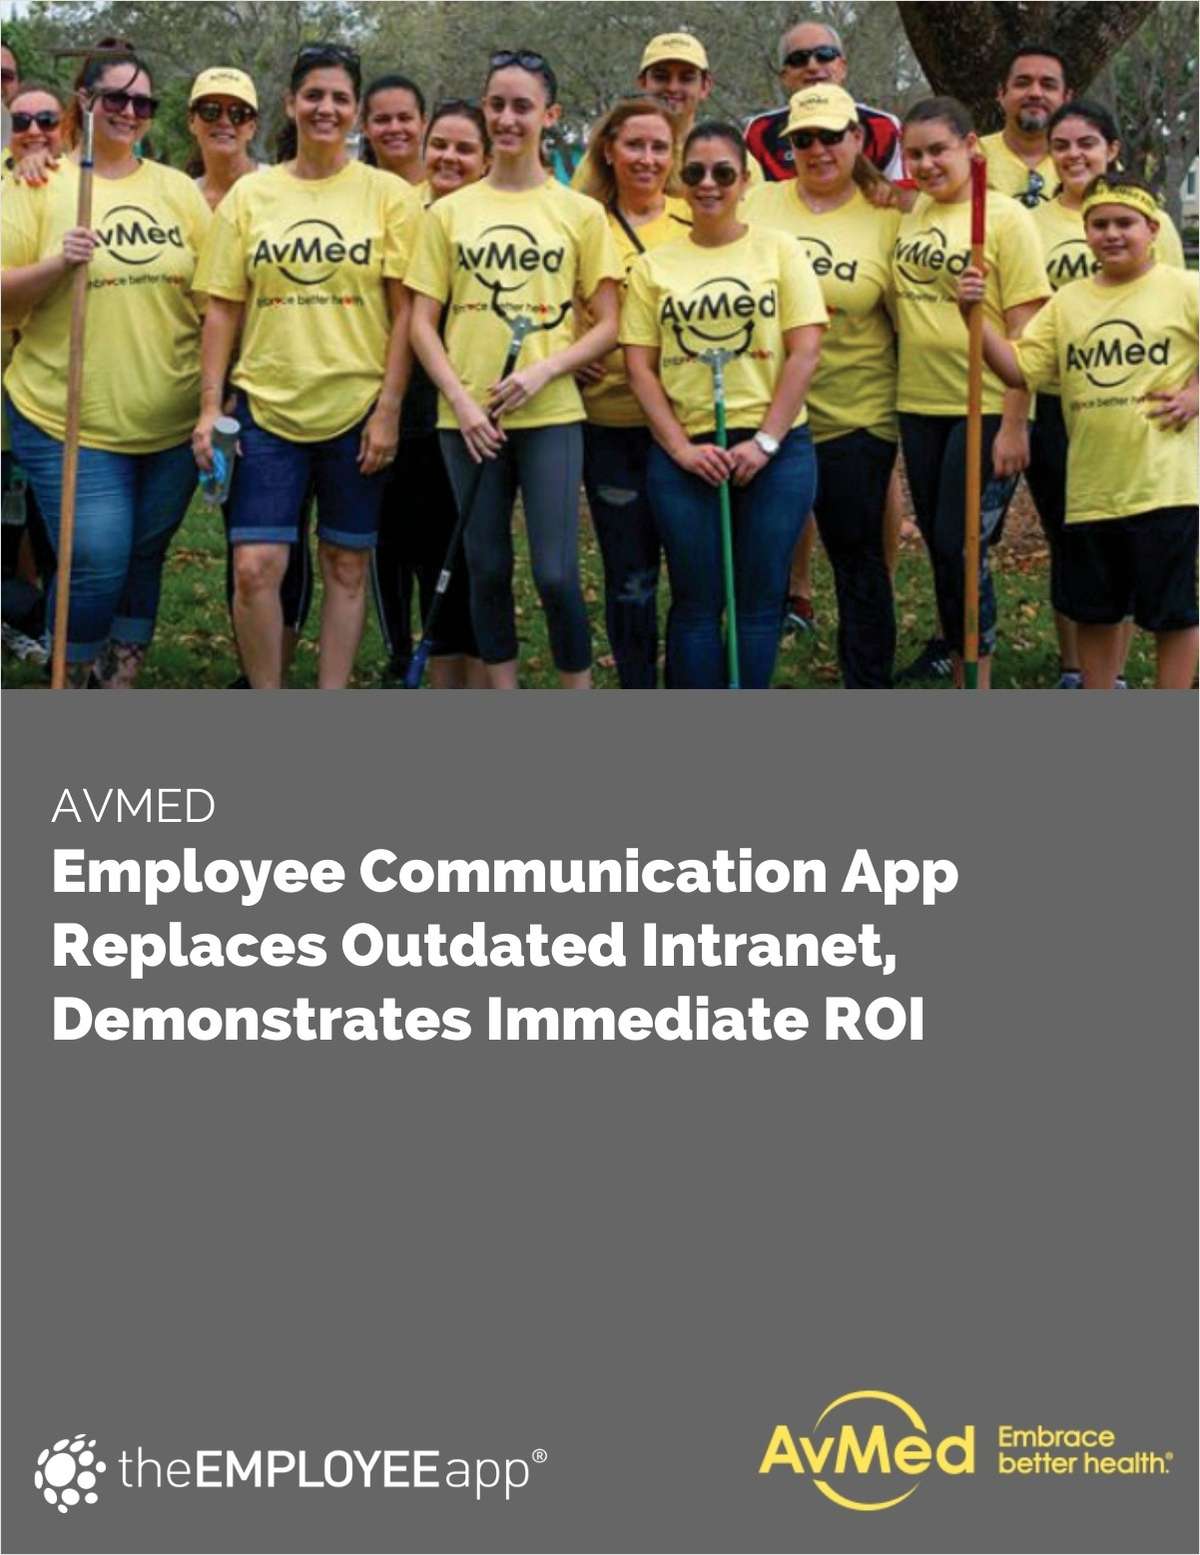 AvMed's New Employee Communication App Demonstrates Immediate ROI with theEMPLOYEEapp